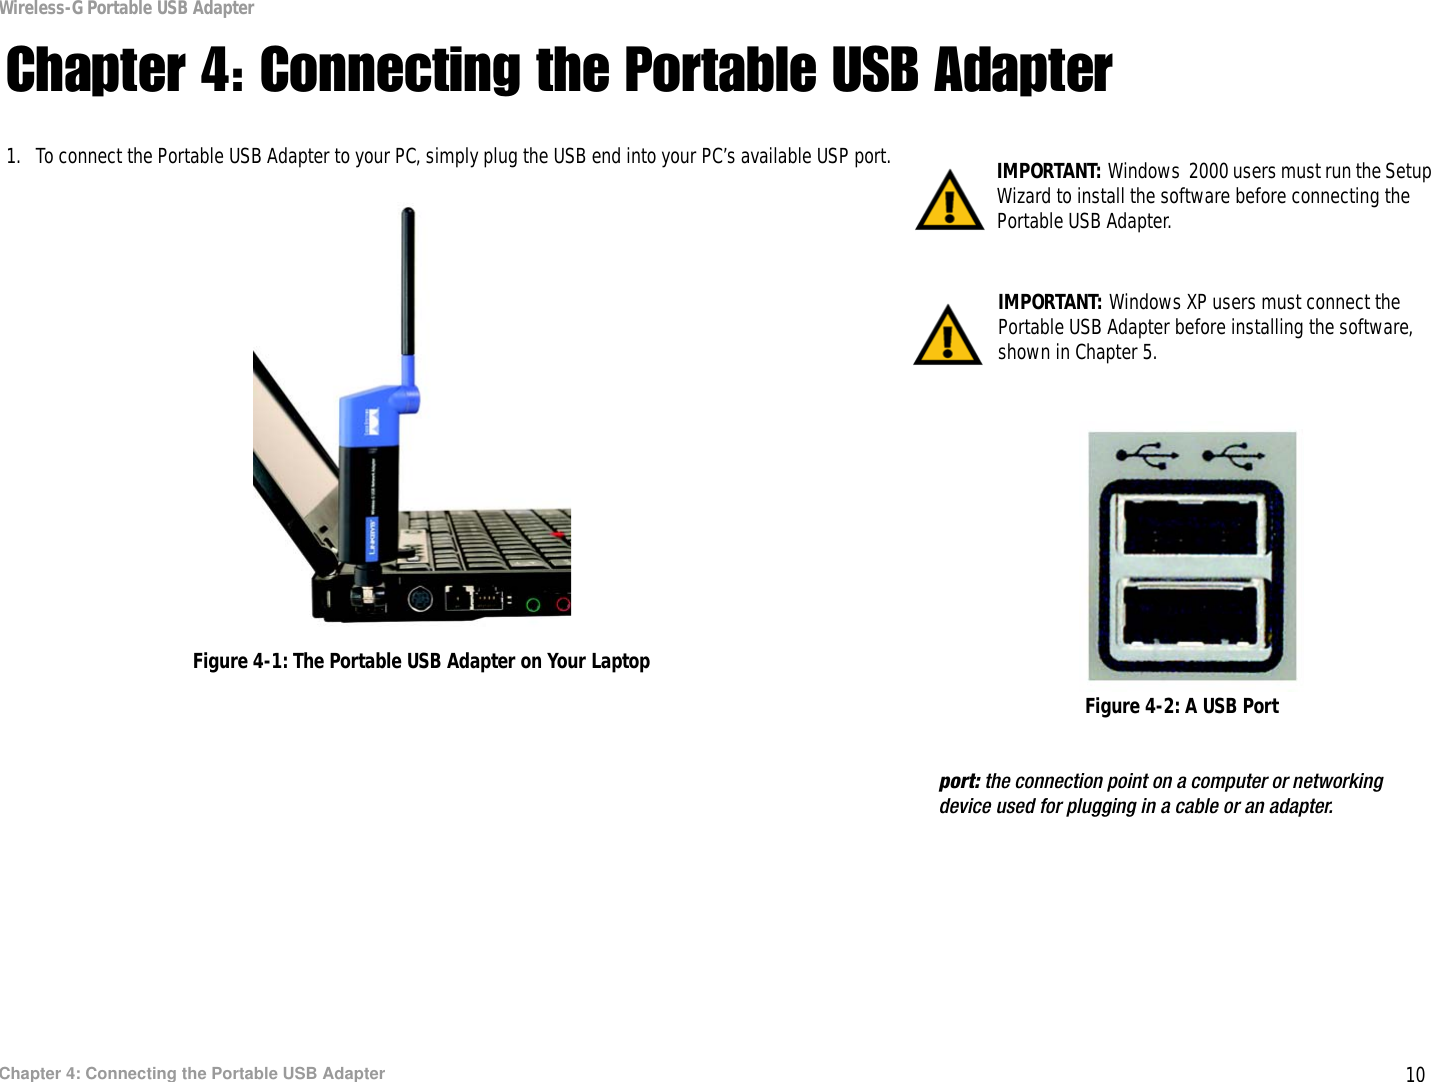 10Chapter 4: Connecting the Portable USB AdapterWireless-G Portable USB AdapterChapter 4: Connecting the Portable USB Adapter1. To connect the Portable USB Adapter to your PC, simply plug the USB end into your PC’s available USP port. IMPORTANT: Windows XP users must connect the Portable USB Adapter before installing the software, shown in Chapter 5.IMPORTANT: Windows  2000 users must run the Setup Wizard to install the software before connecting the Portable USB Adapter.Figure 4-1: The Portable USB Adapter on Your LaptopFigure 4-2: A USB Portport: the connection point on a computer or networking device used for plugging in a cable or an adapter. 